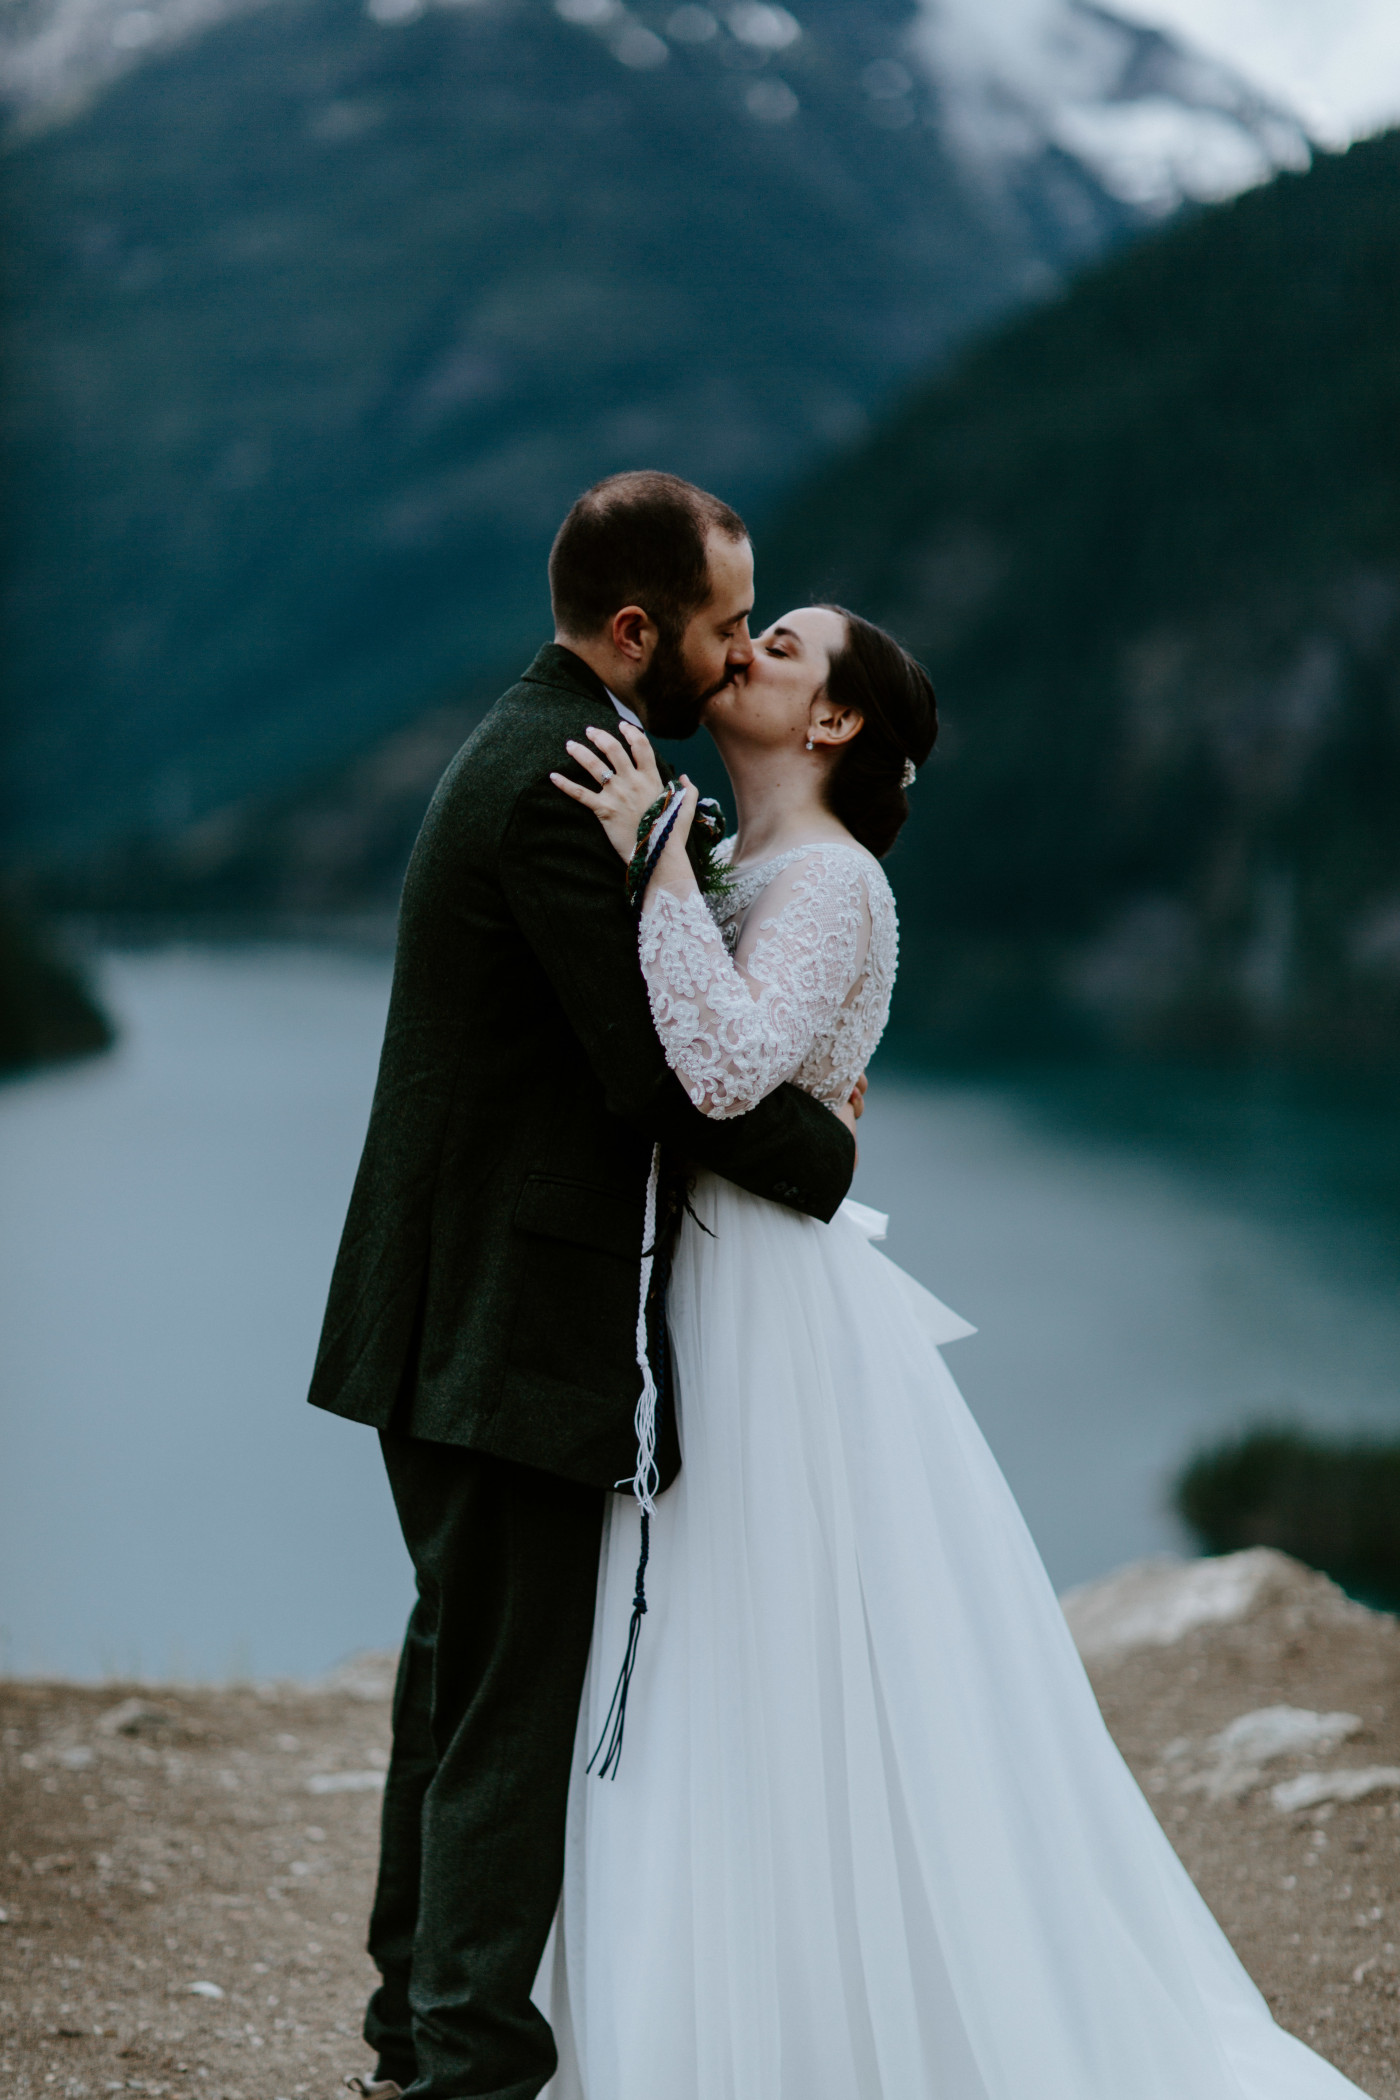 Alex and Elizabeth kiss at Diablo Lake Overlook. Elopement photography at North Cascades National Park by Sienna Plus Josh.